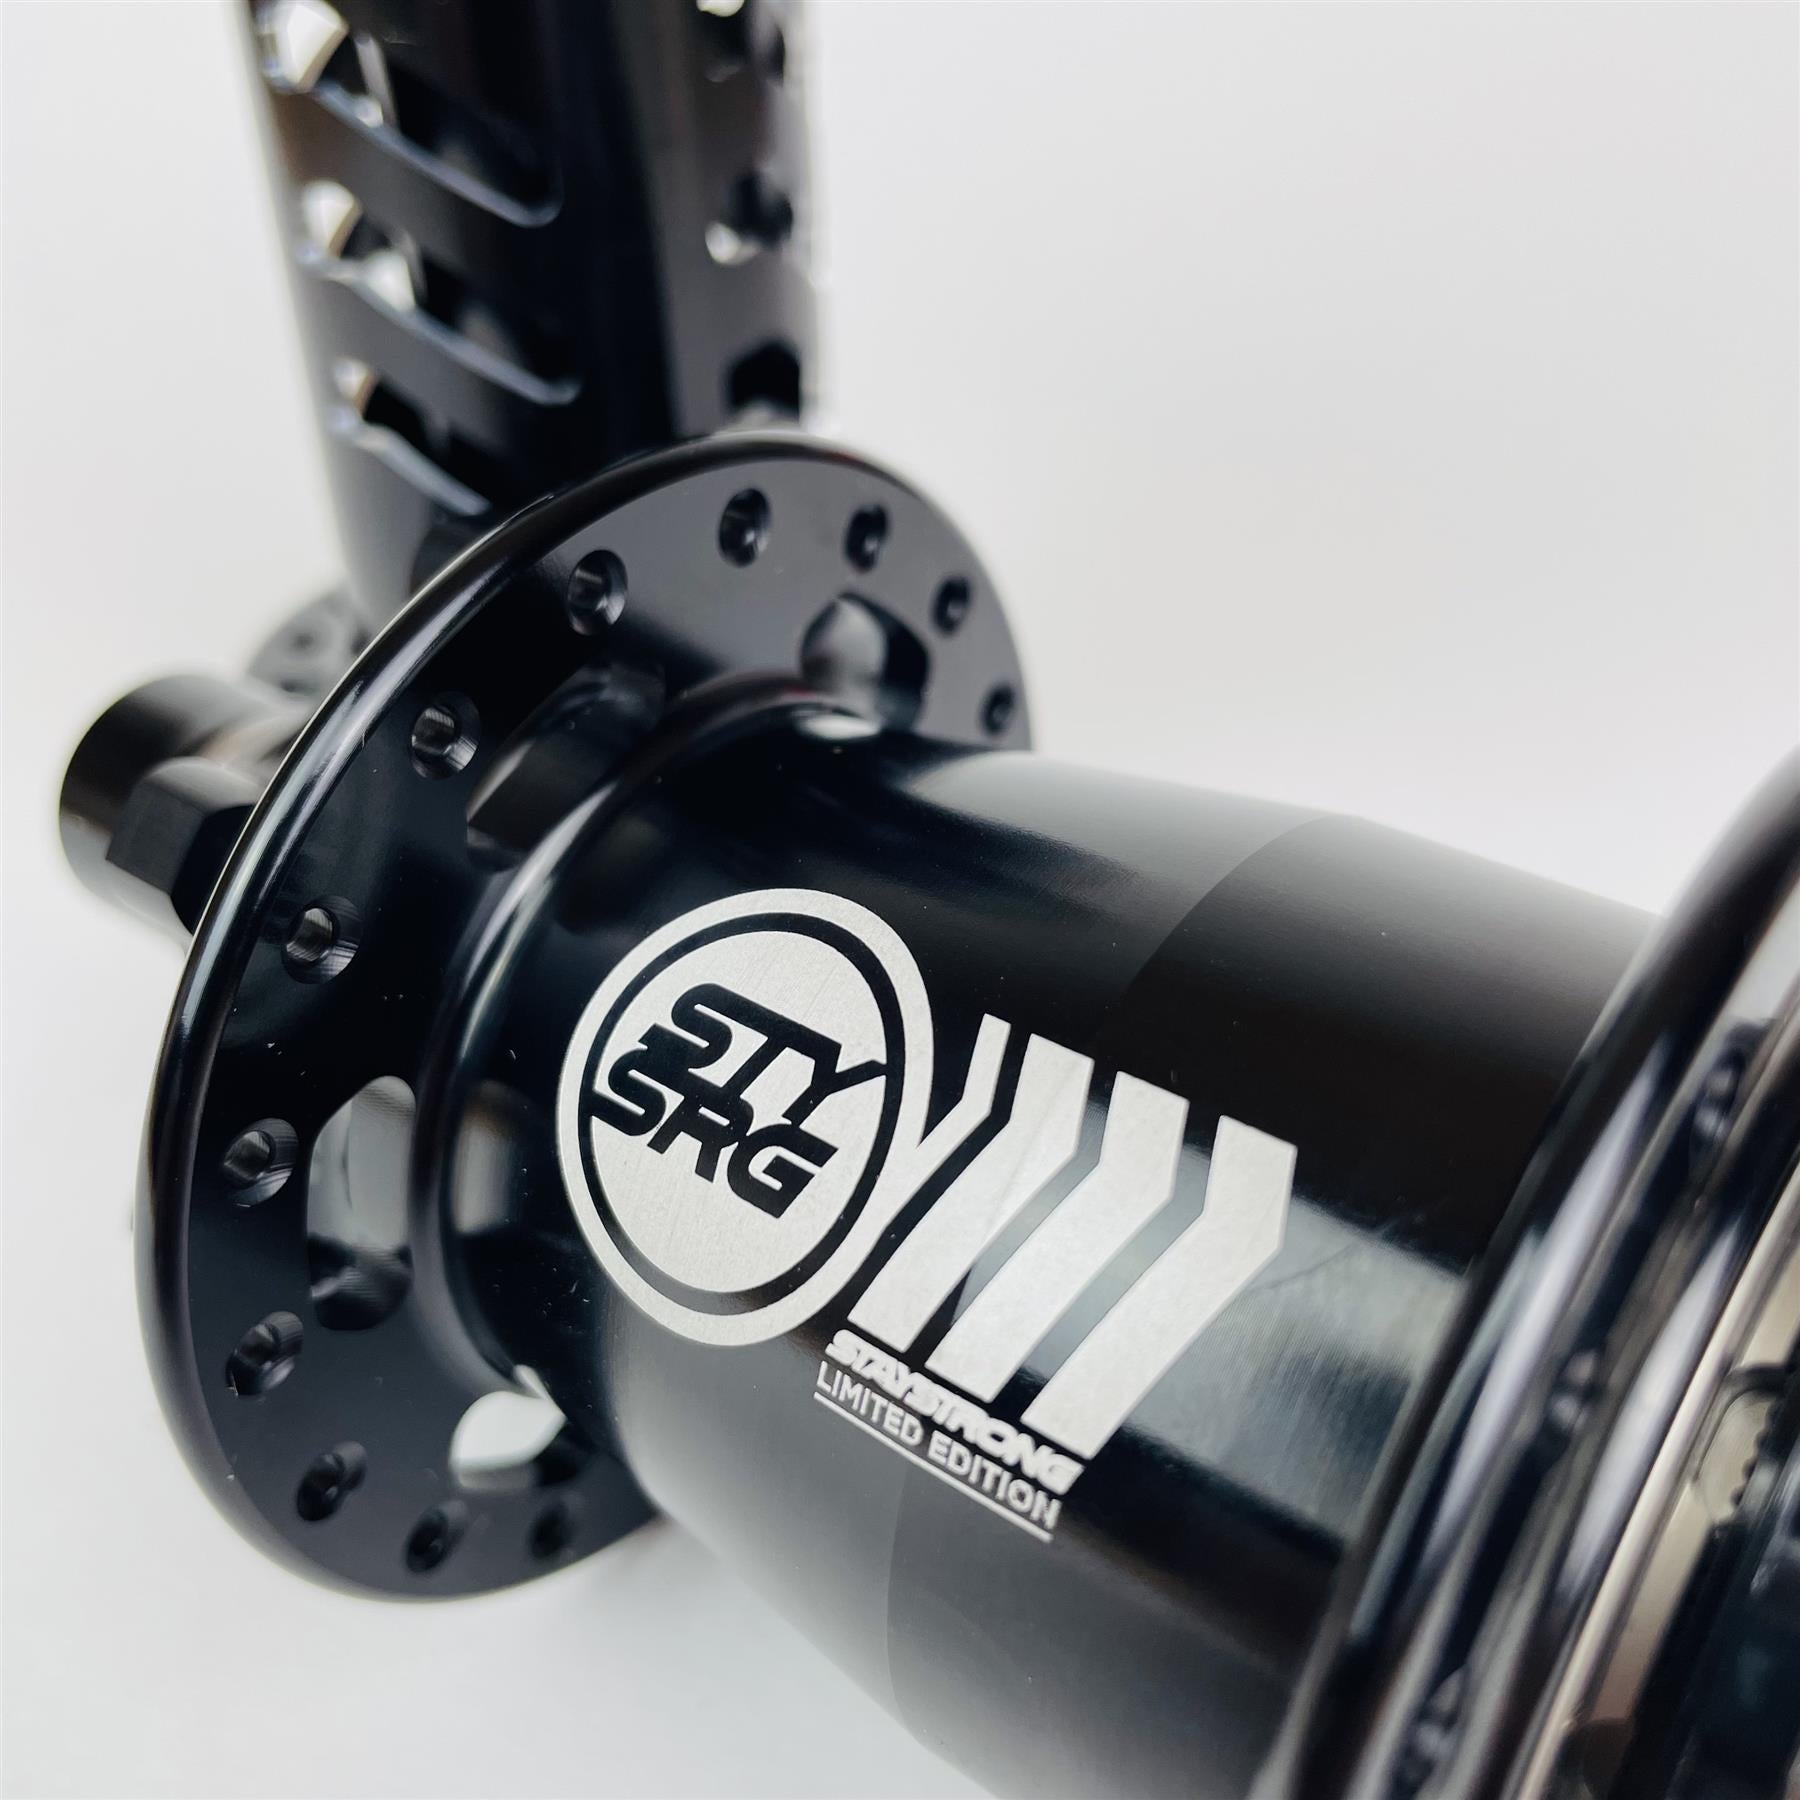 Stay Strong Limited Edition Onyx Ultra 36h Disc Hubset - 20mm (Avant) 10mm (Arrière)